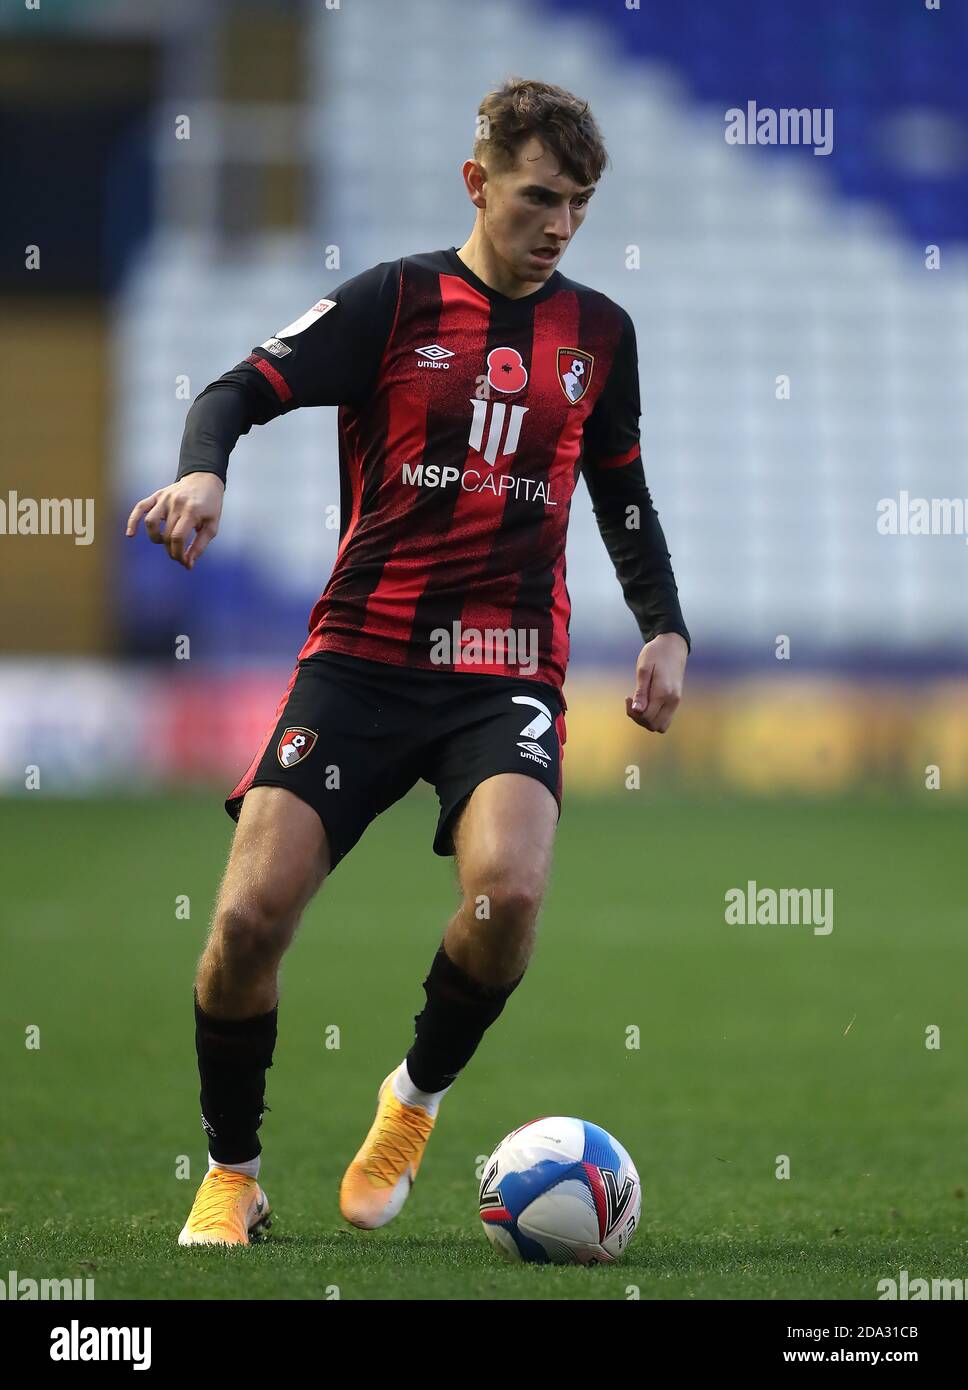 AFC Bournemouth's David Brooks during the Sky Bet Championship match at St. Andrew's Trillion Trophy Stadium, Birmingham. Stock Photo